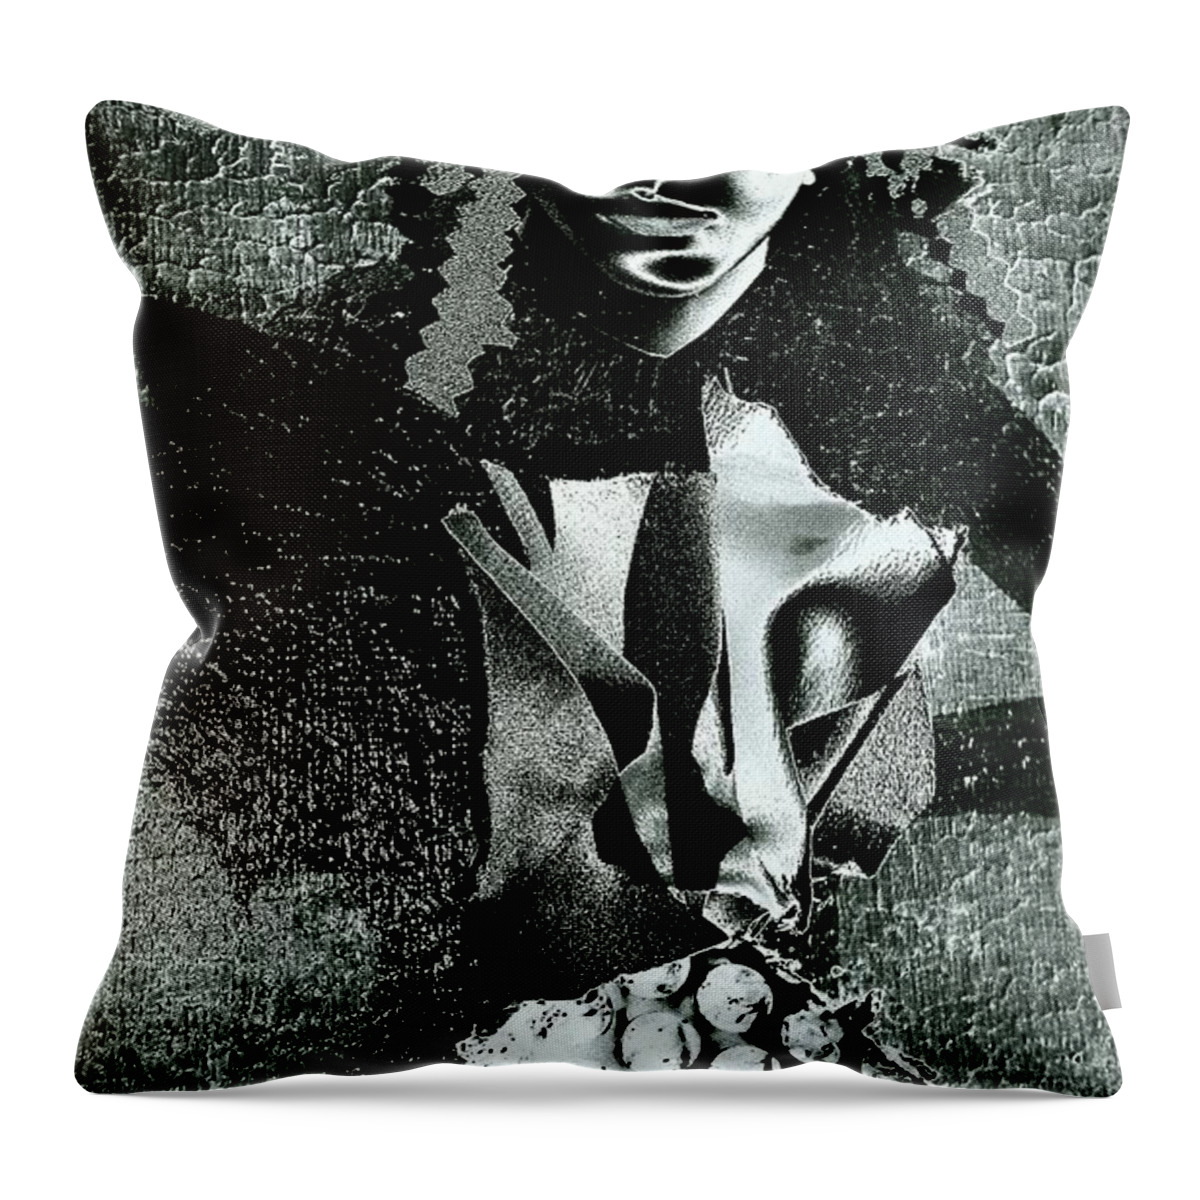 Shadow Throw Pillow featuring the mixed media Shadow by Jacqueline McReynolds